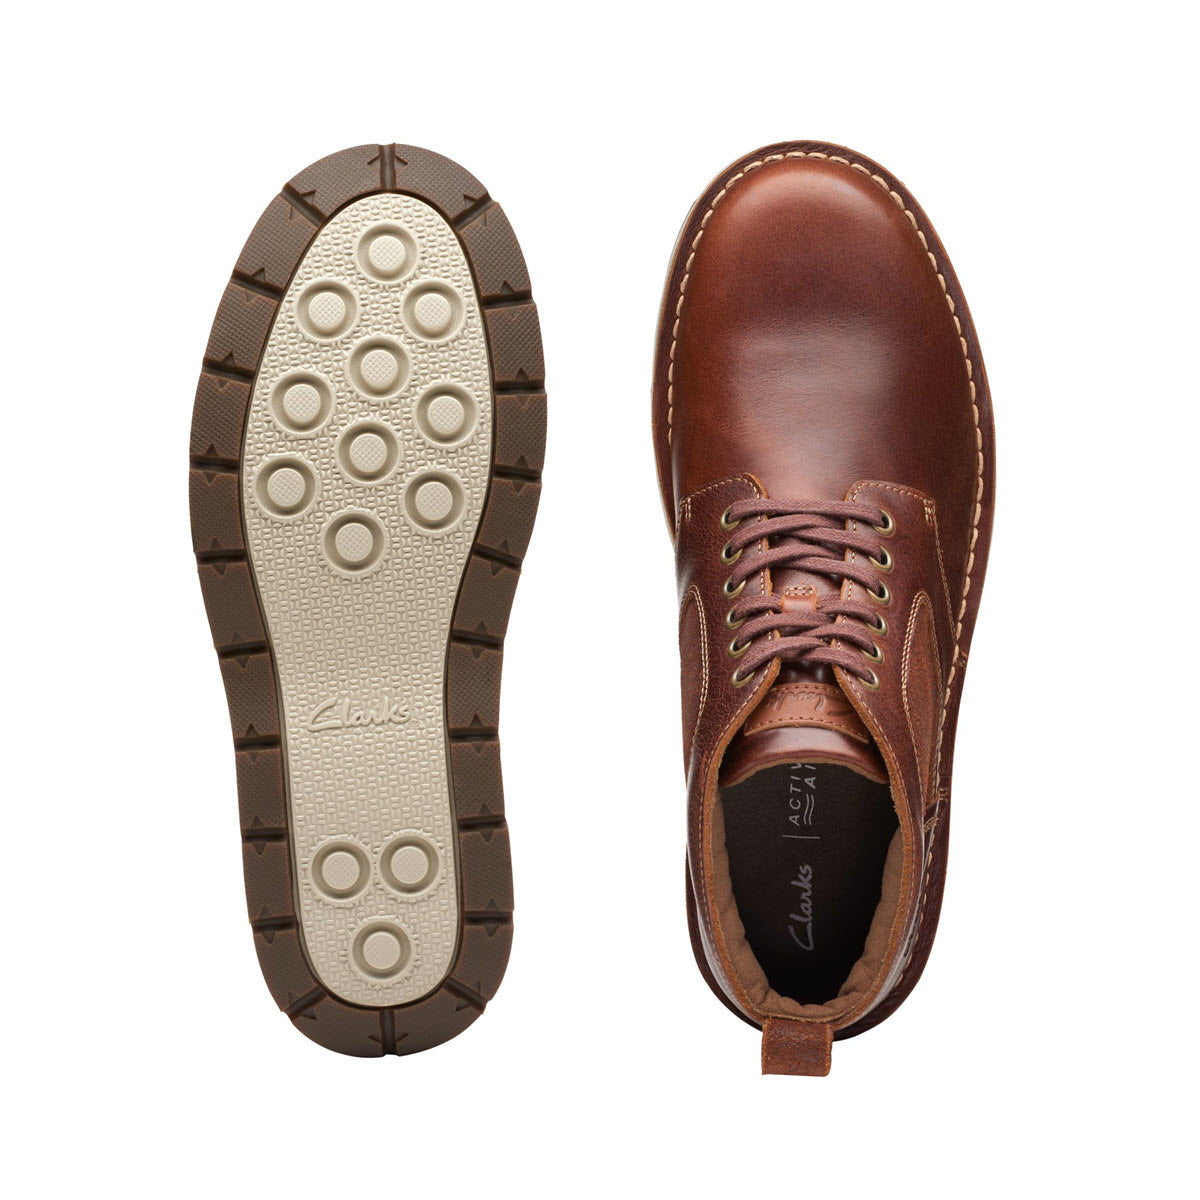 Top view of a brown Clarks Gravelle Top Lace Boot Tan Leather - Mens boot made from premium leathers, next to its sole, showing detailed stitching and embossed branding.